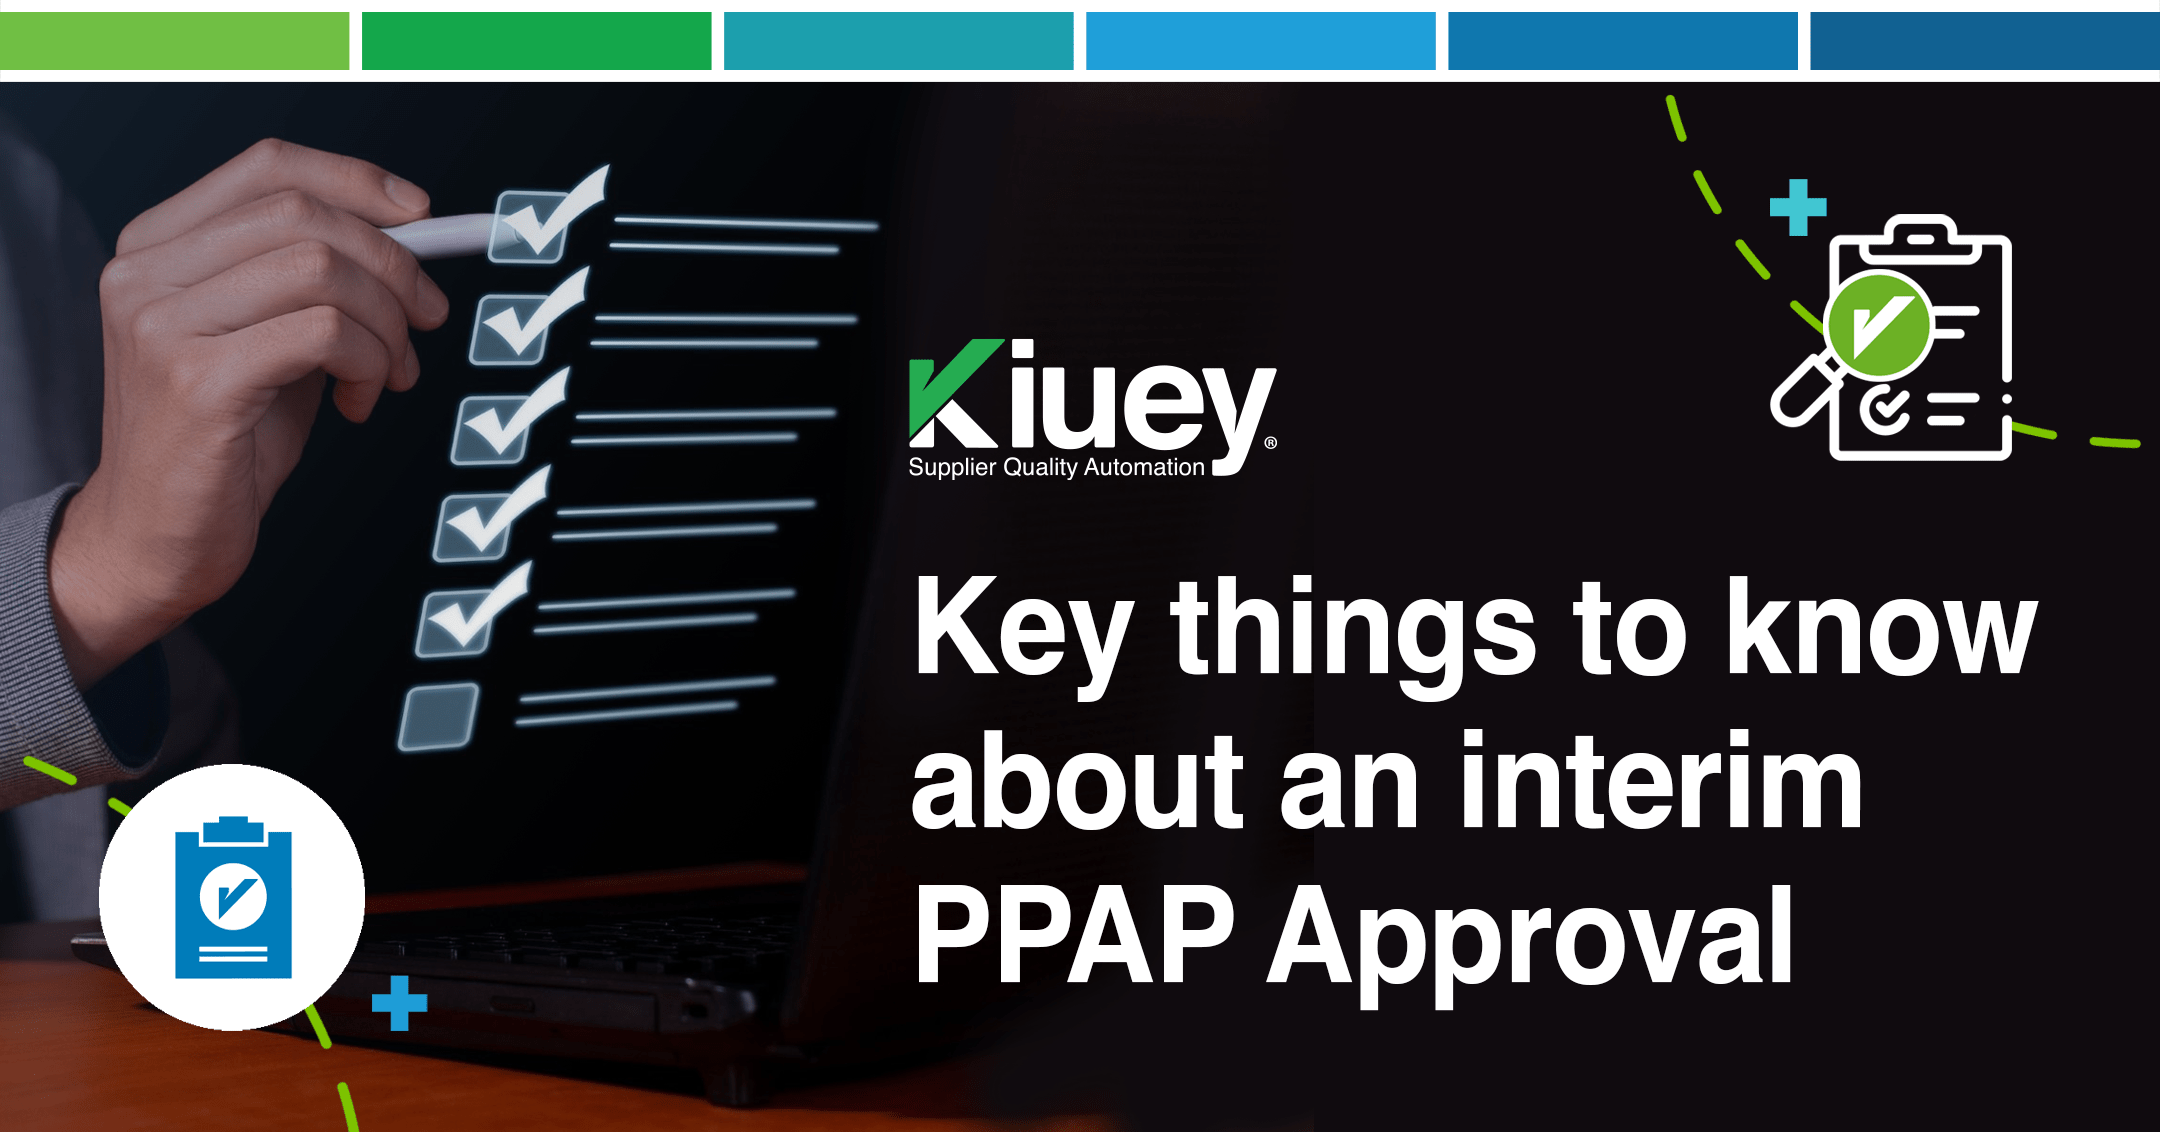 What to know about an interim PPAP Approval